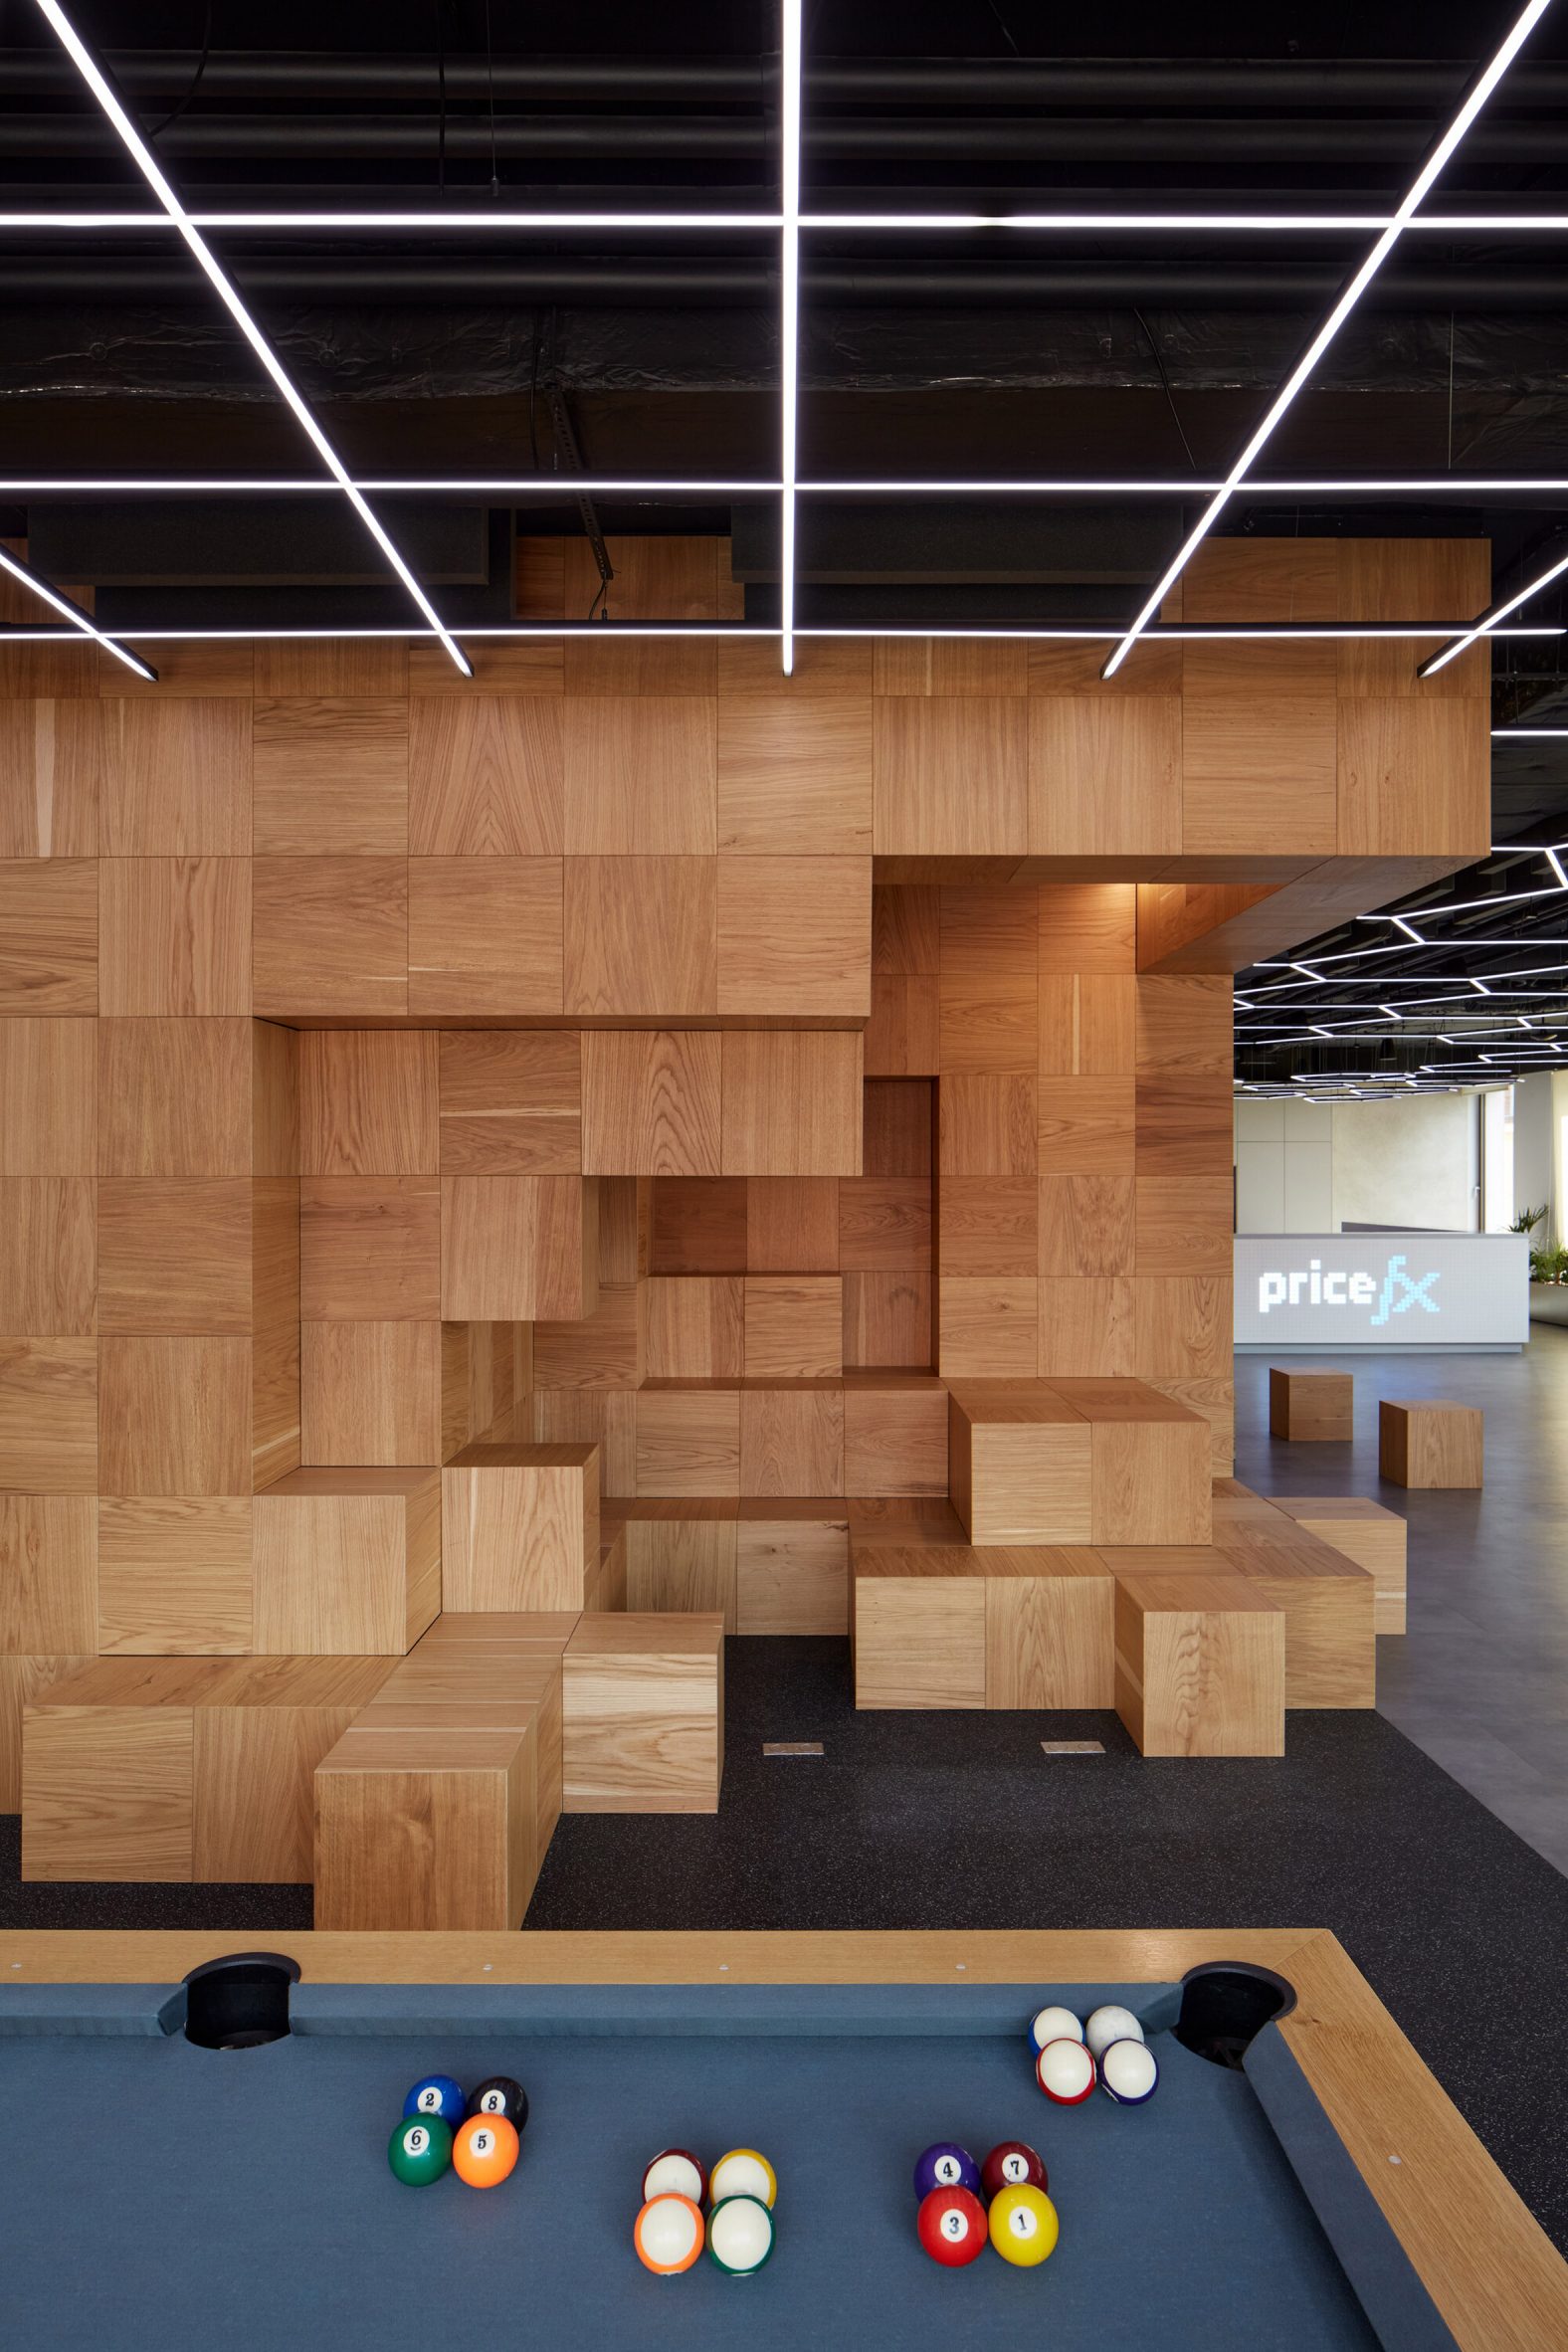 Pixelated wood in Pricefx office by Collcoll in Prague